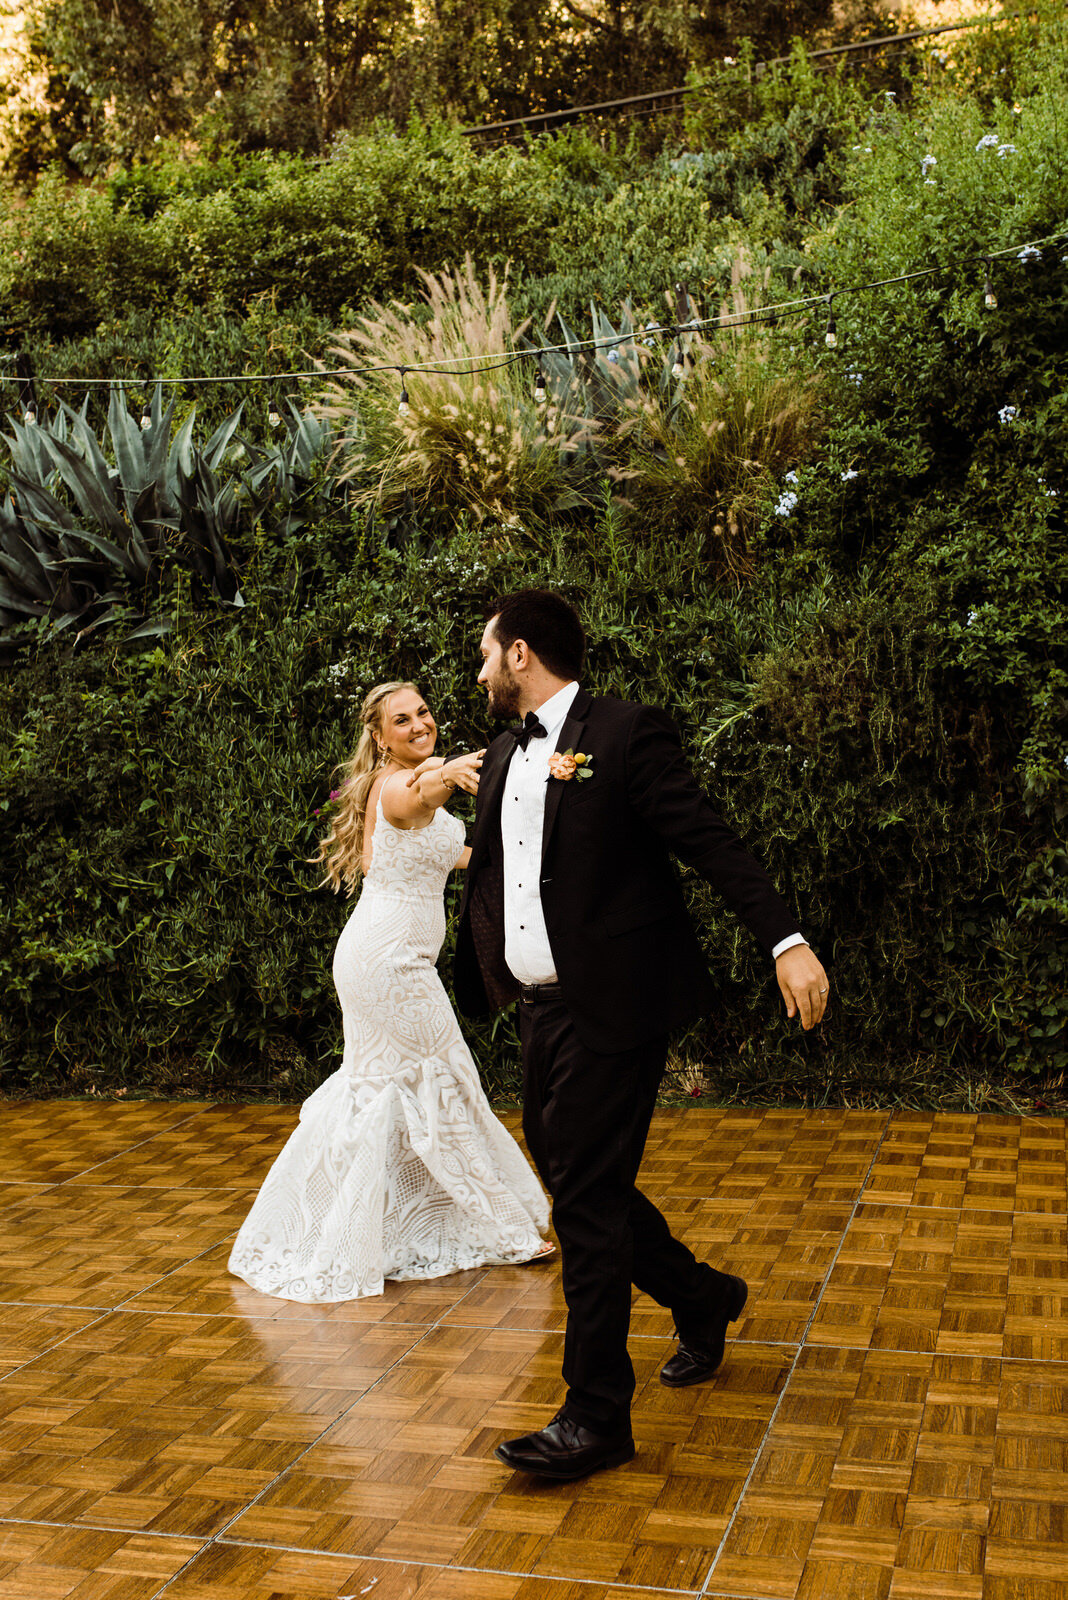 Bride and Groom First Dance at Summer LA Houdini Estate Garden Wedding | photo by Kept Record | www.keptrecord.com